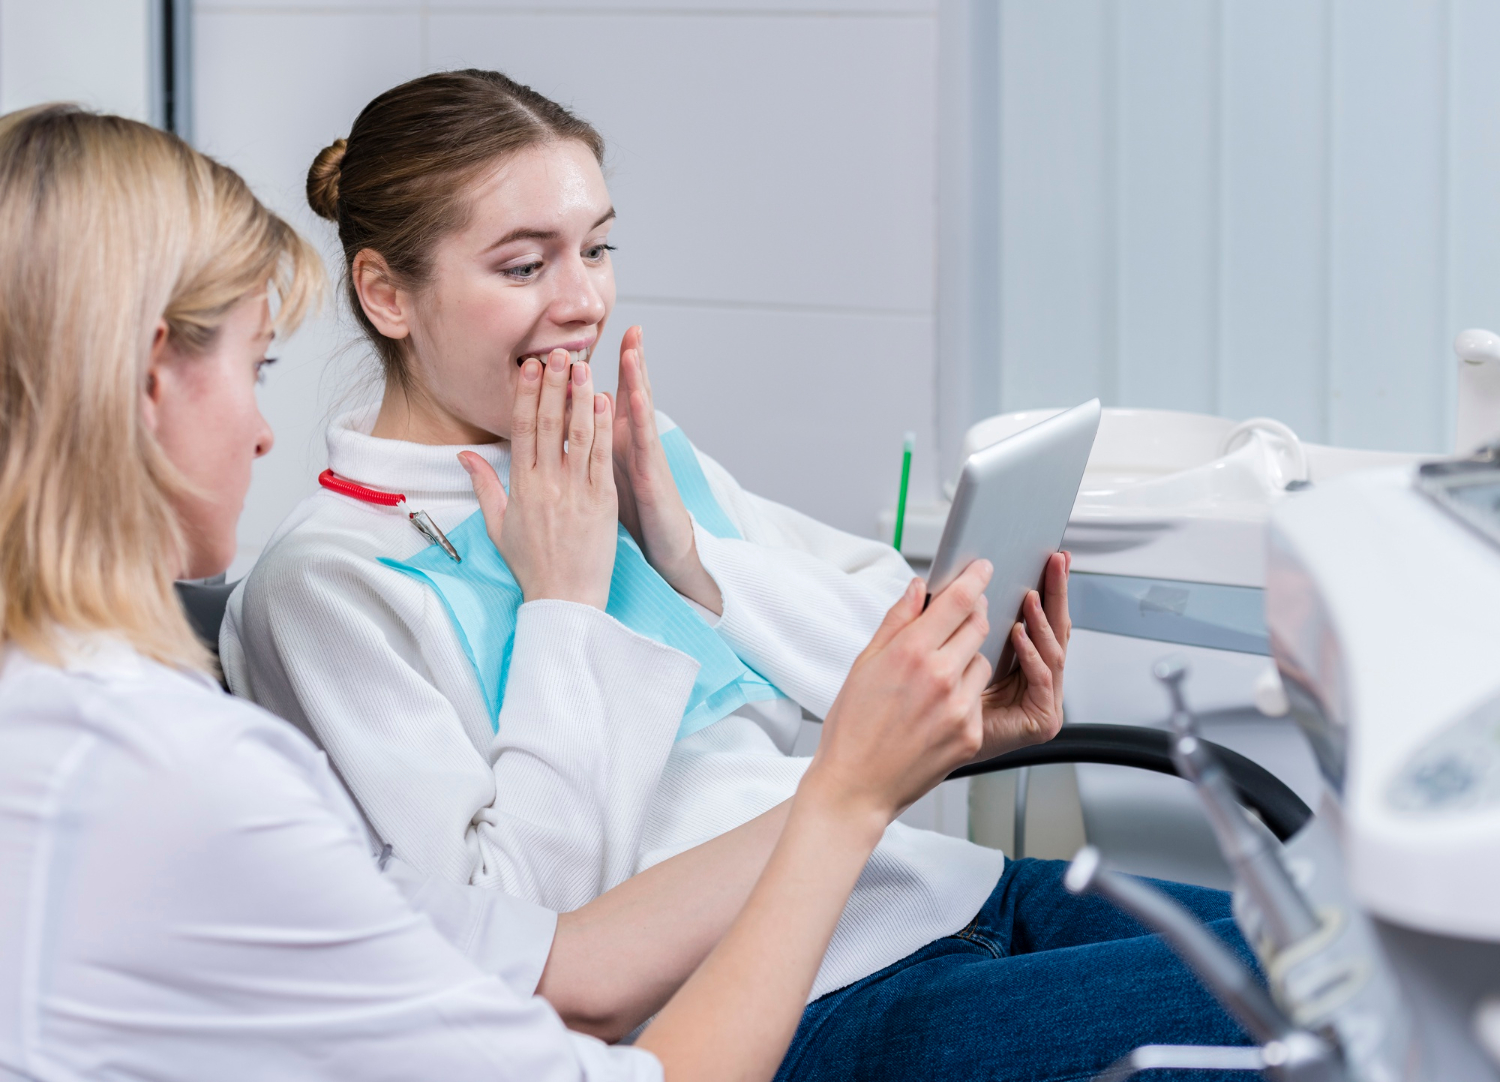 Dental Appointments Demystified: Tips and Tricks for a Smooth Visit